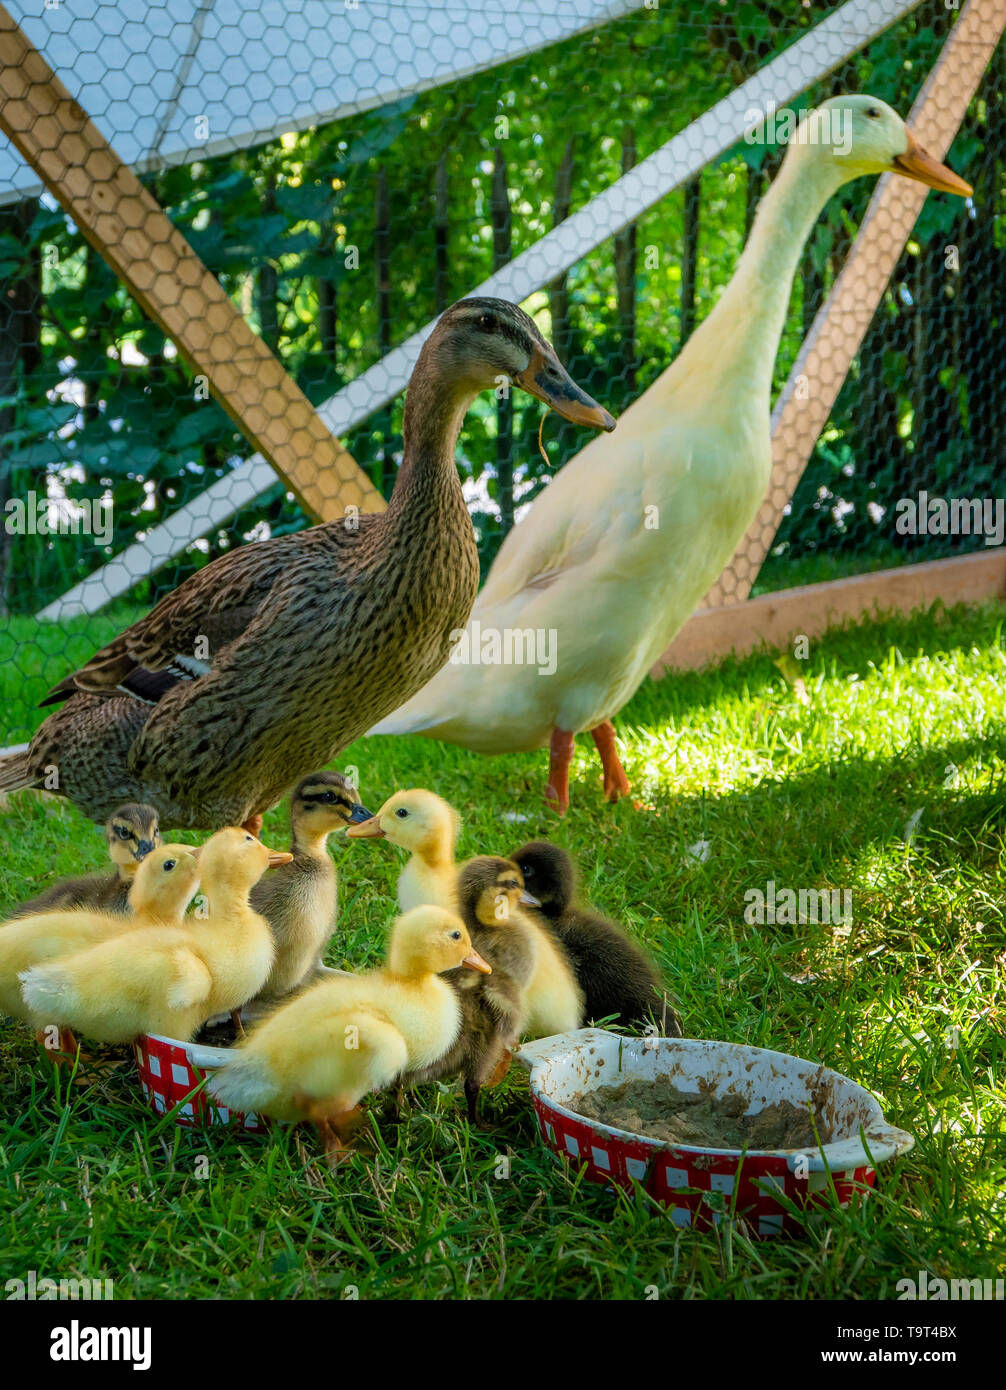 Indian run ducks, also bottle duck (Anas platyrhynchos following domestica) with fledgling, Indische Laufenten, auch Flaschenente (Anas platyrhynchos  Stock Photo